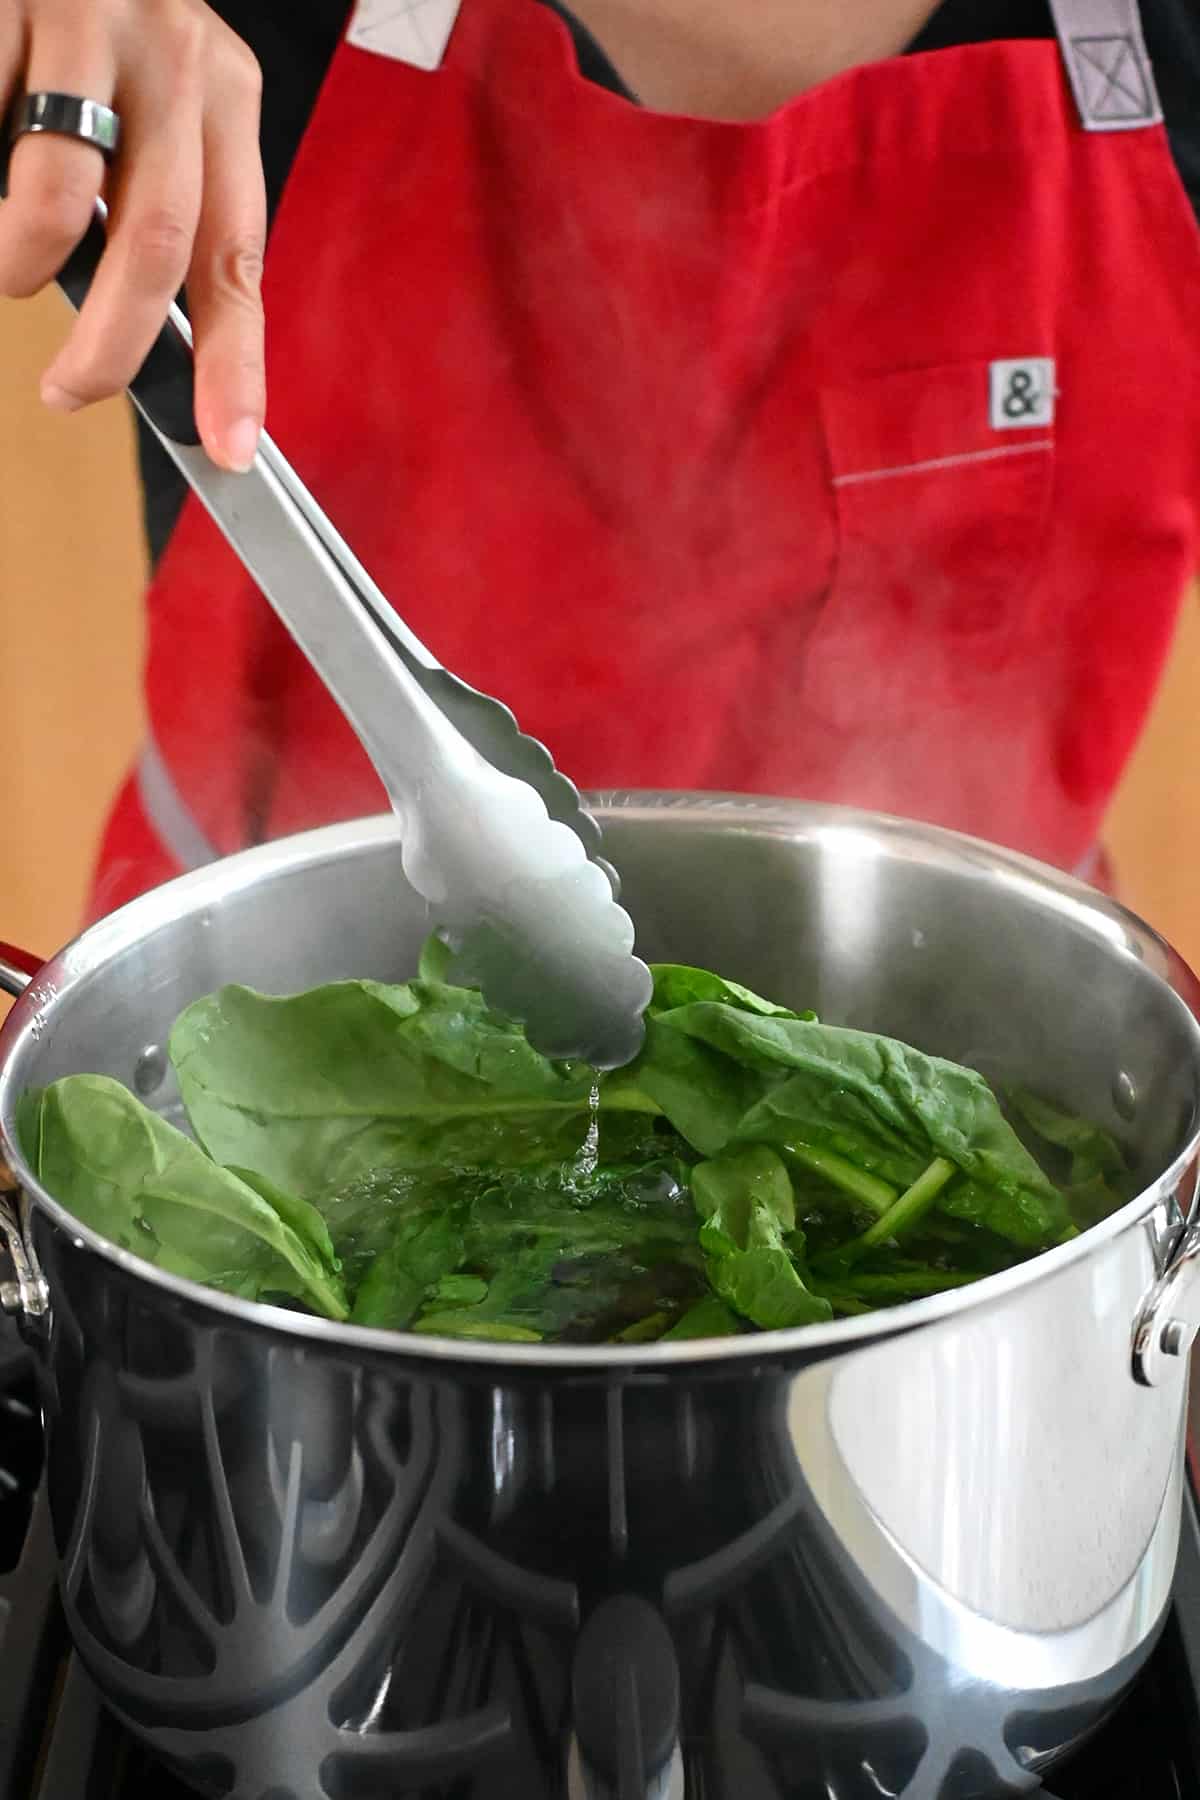 A pair of tongs is adding raw spinach to a large pot of boiling water to make a Korean spinach side dish.